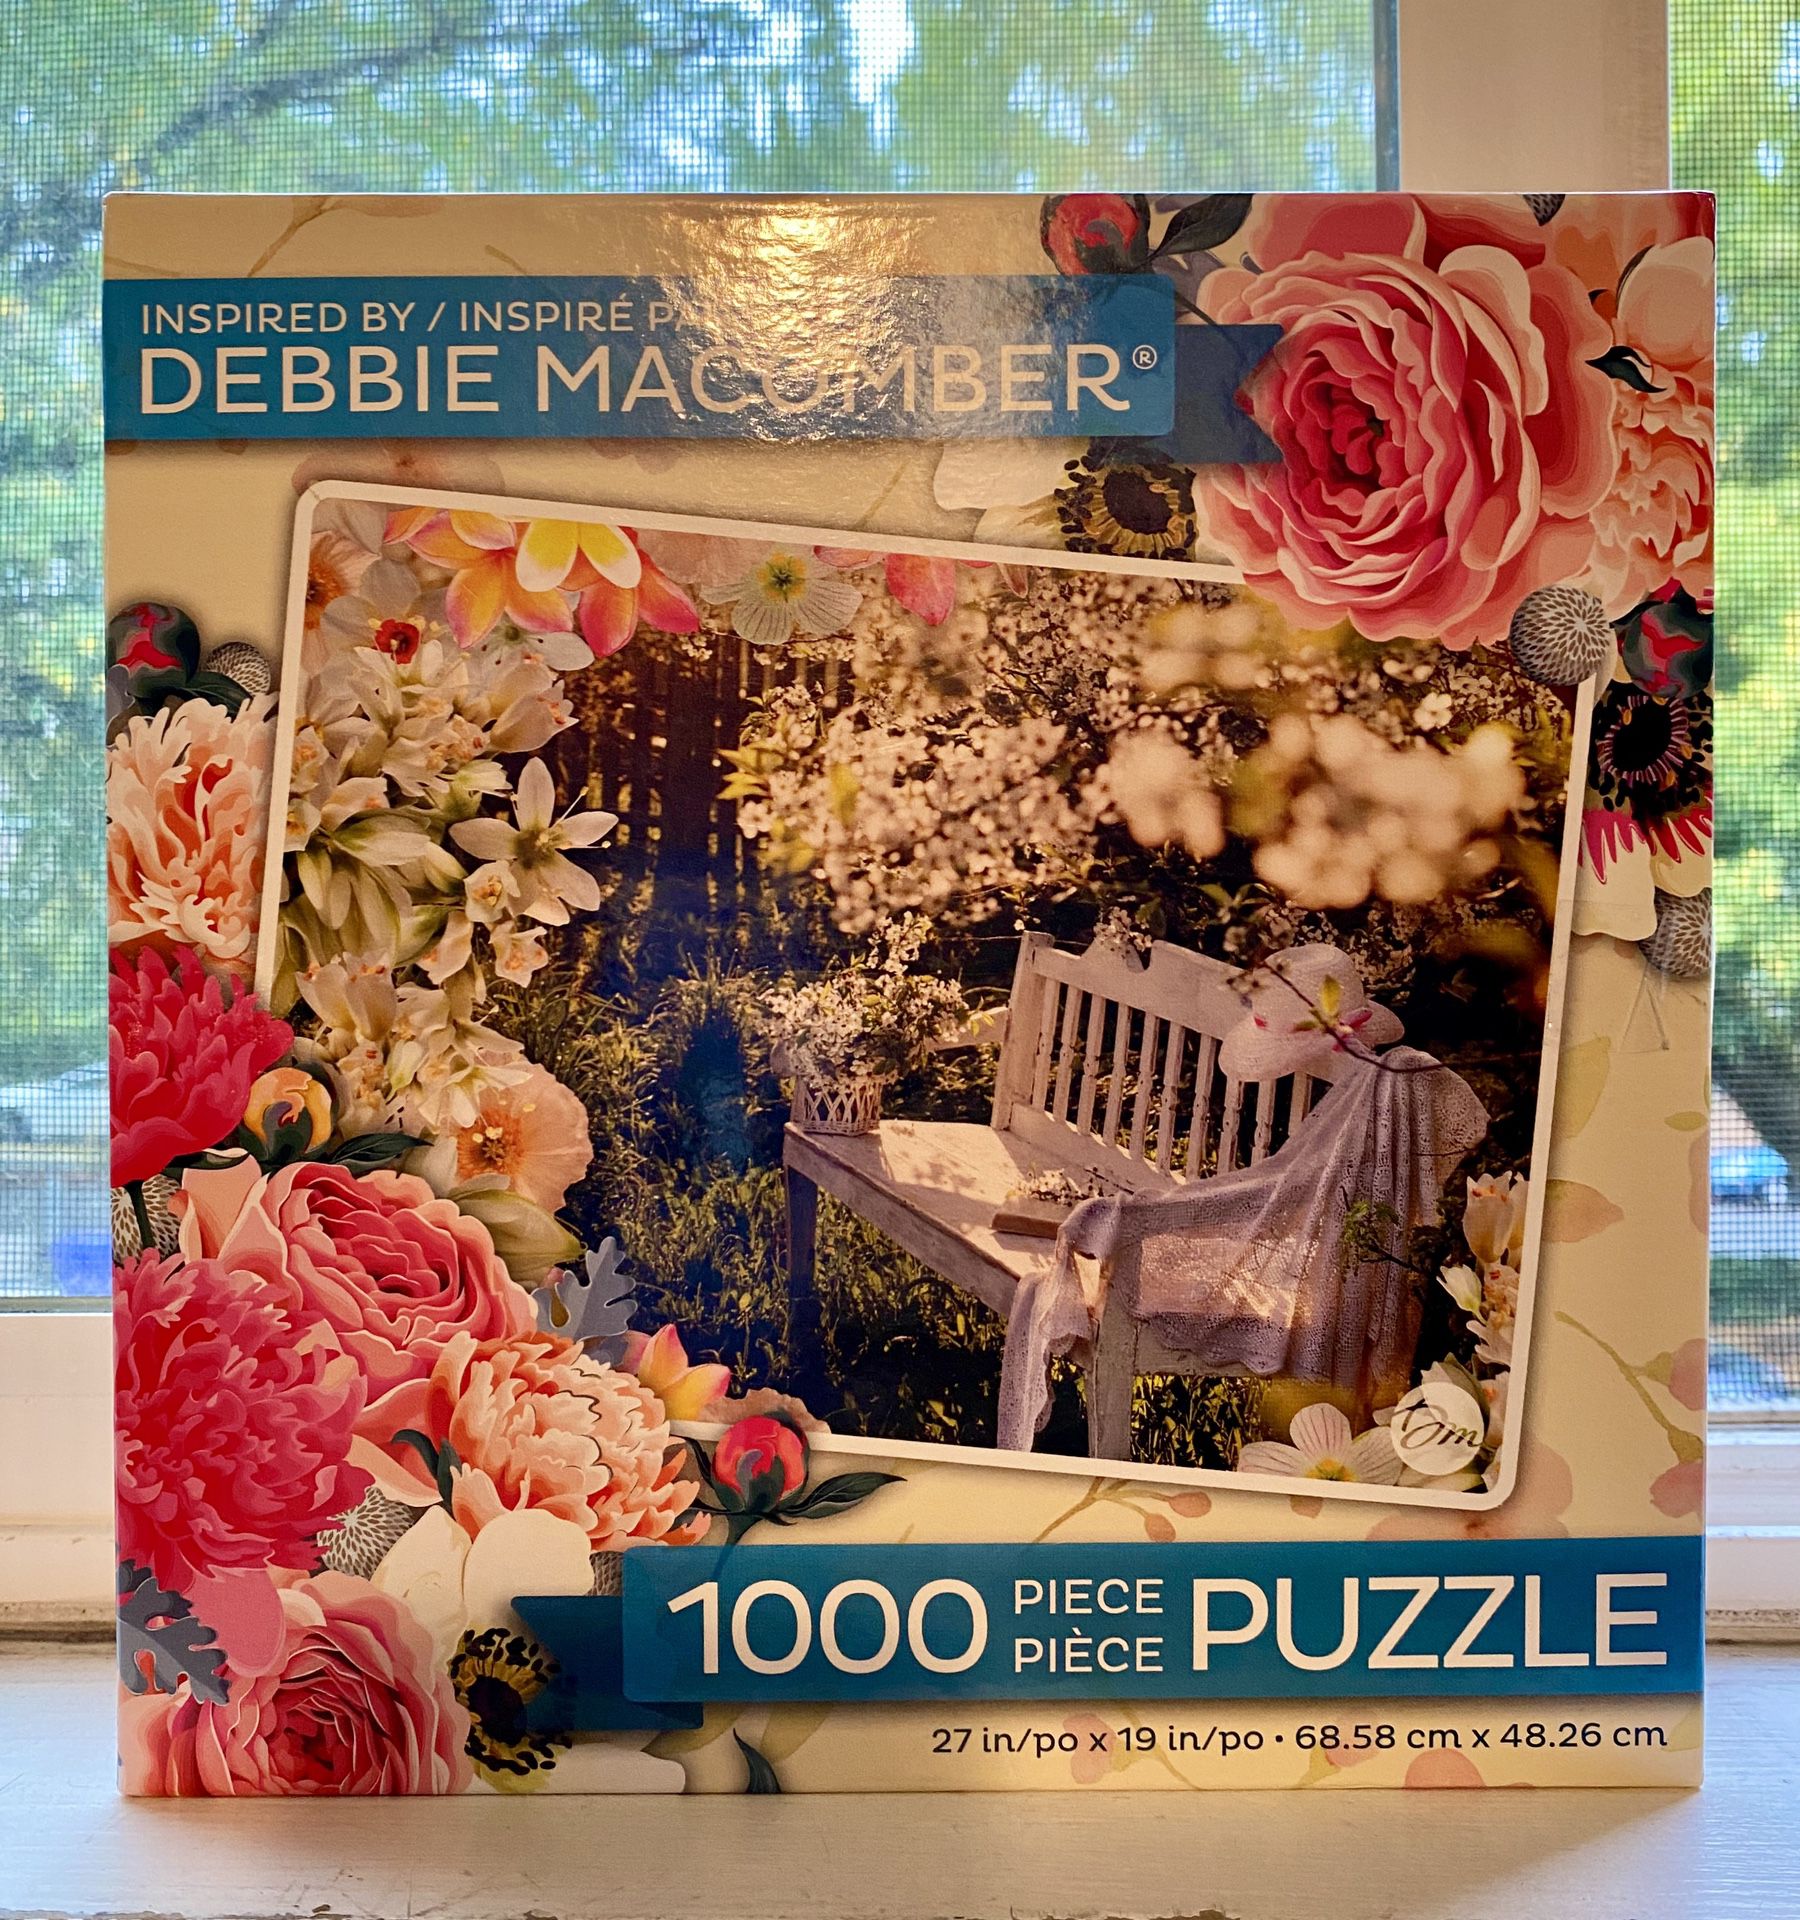 1000 piece puzzle. See photos for details.